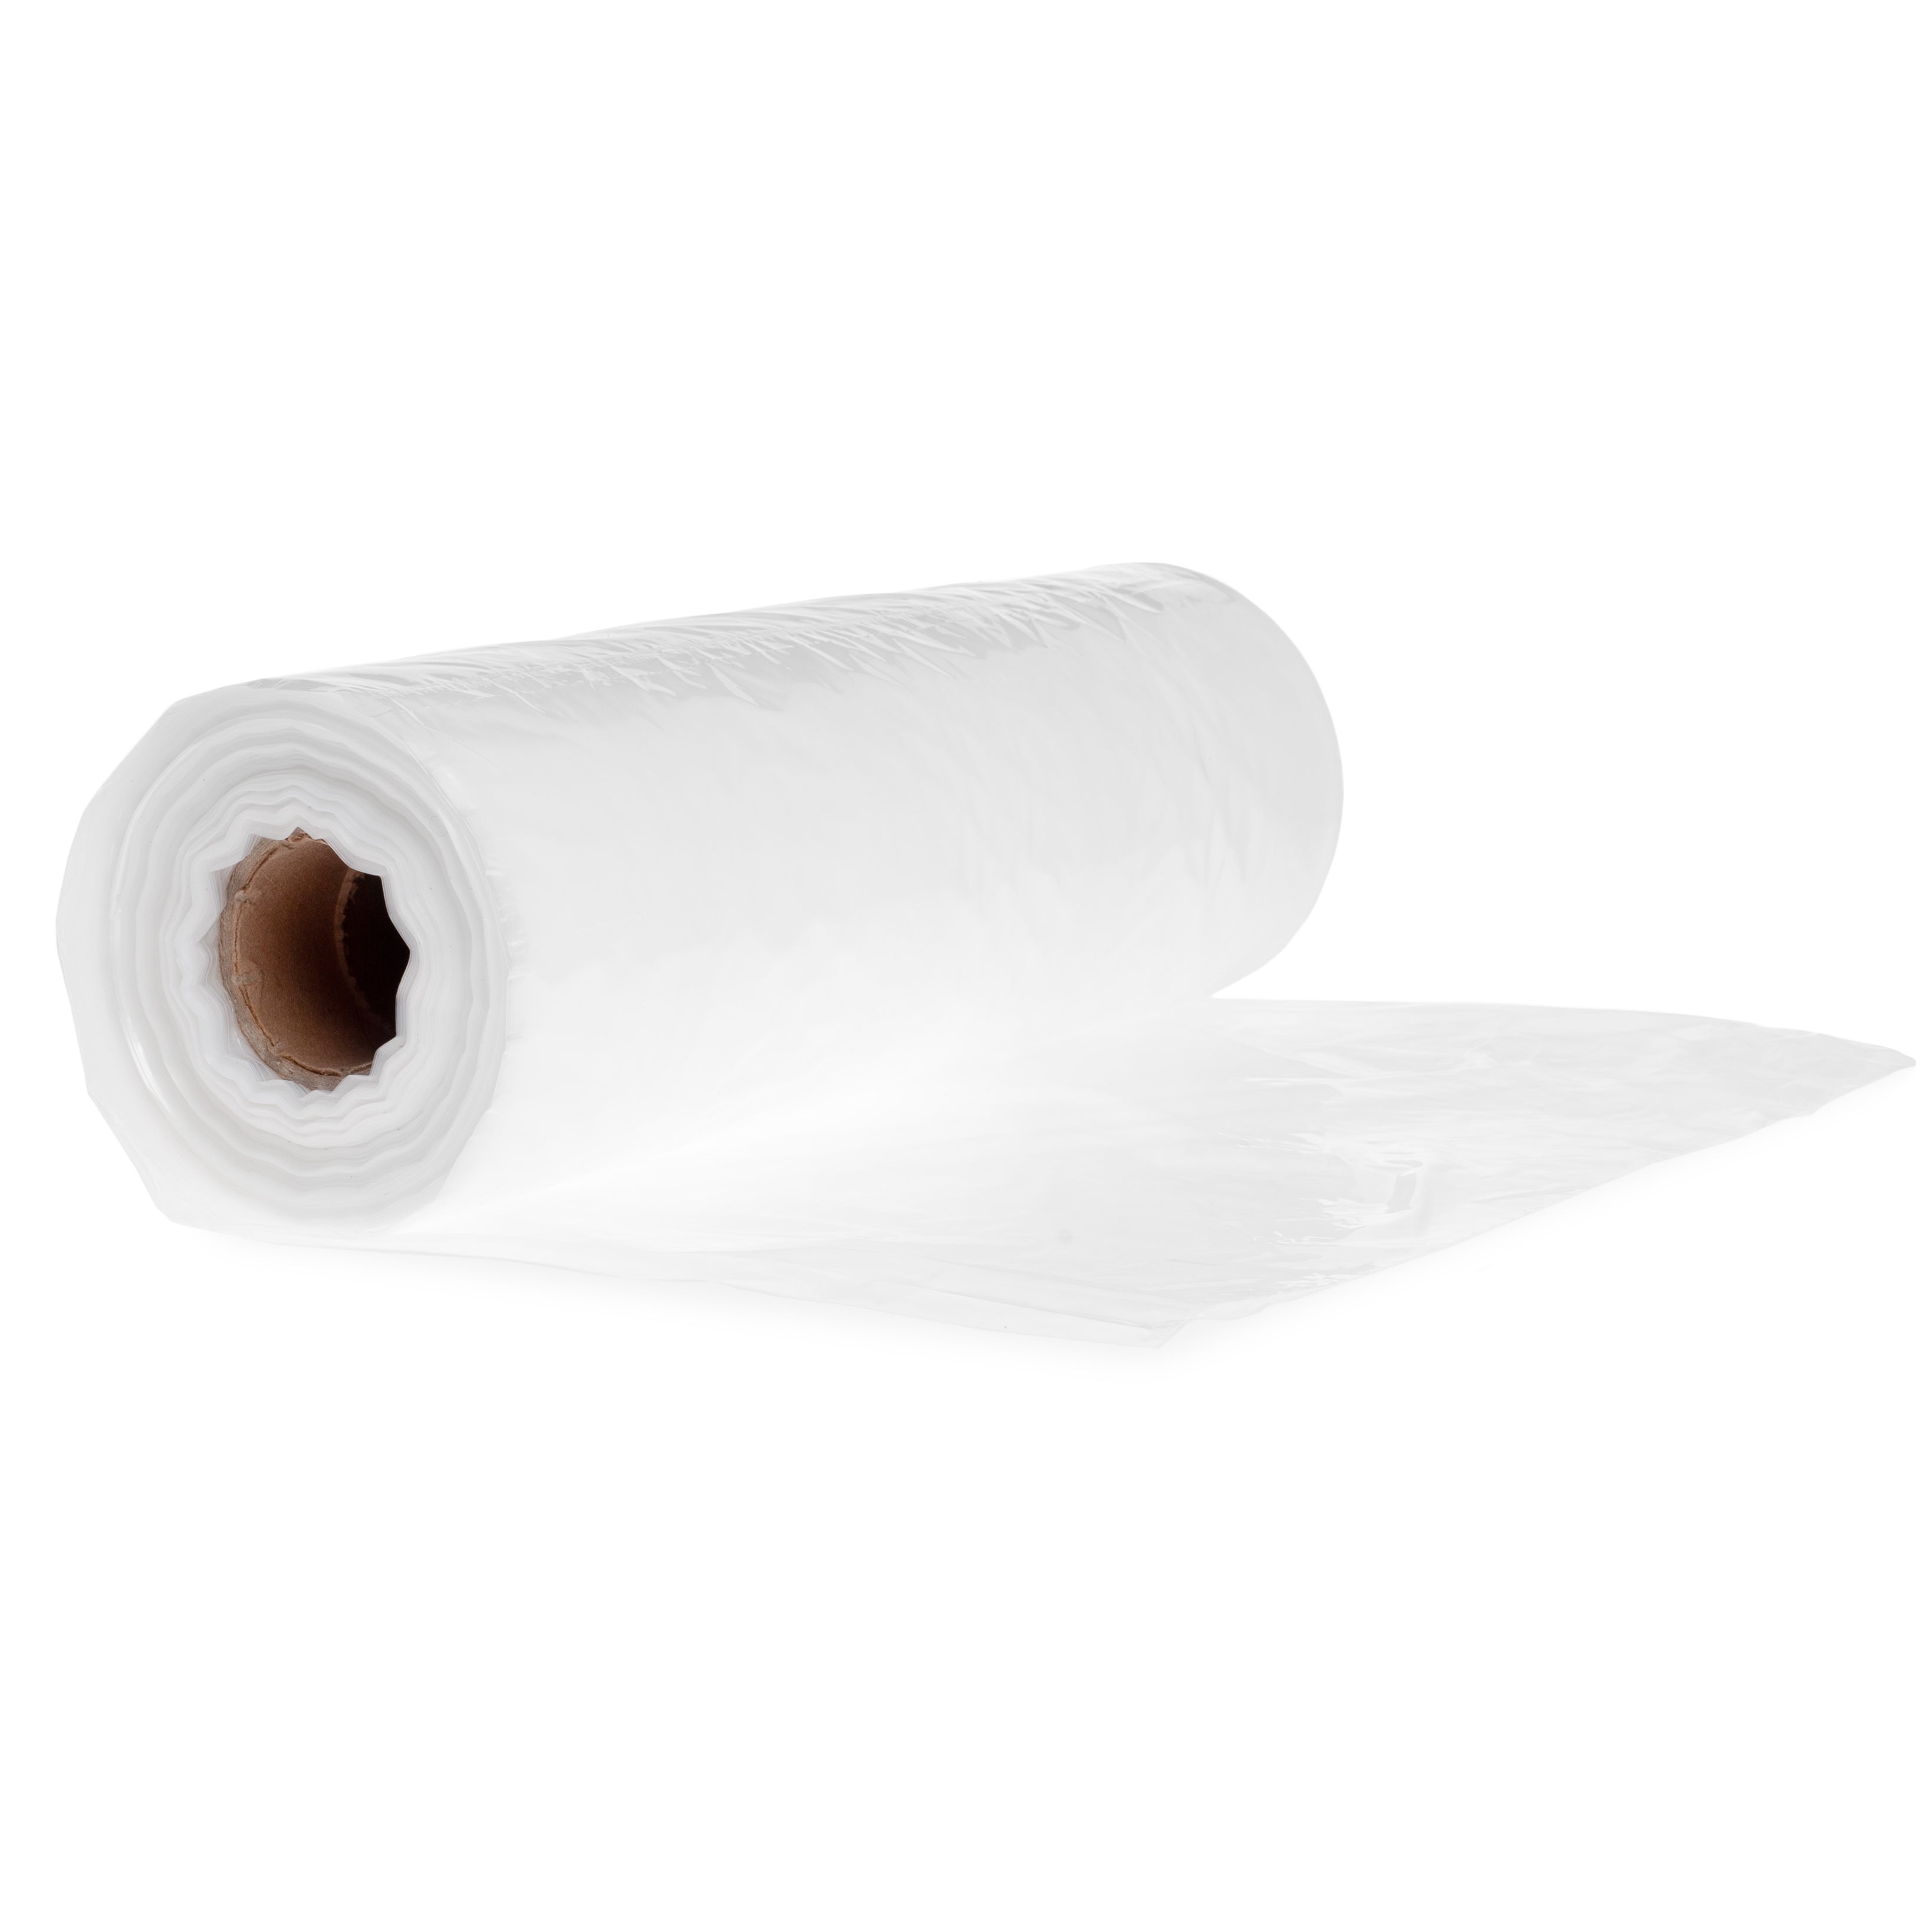 Easy Dispense Roll Packaging - Convenient Roll of 5 Gallon Bucket Liners from 'Not For Turkeys' Line